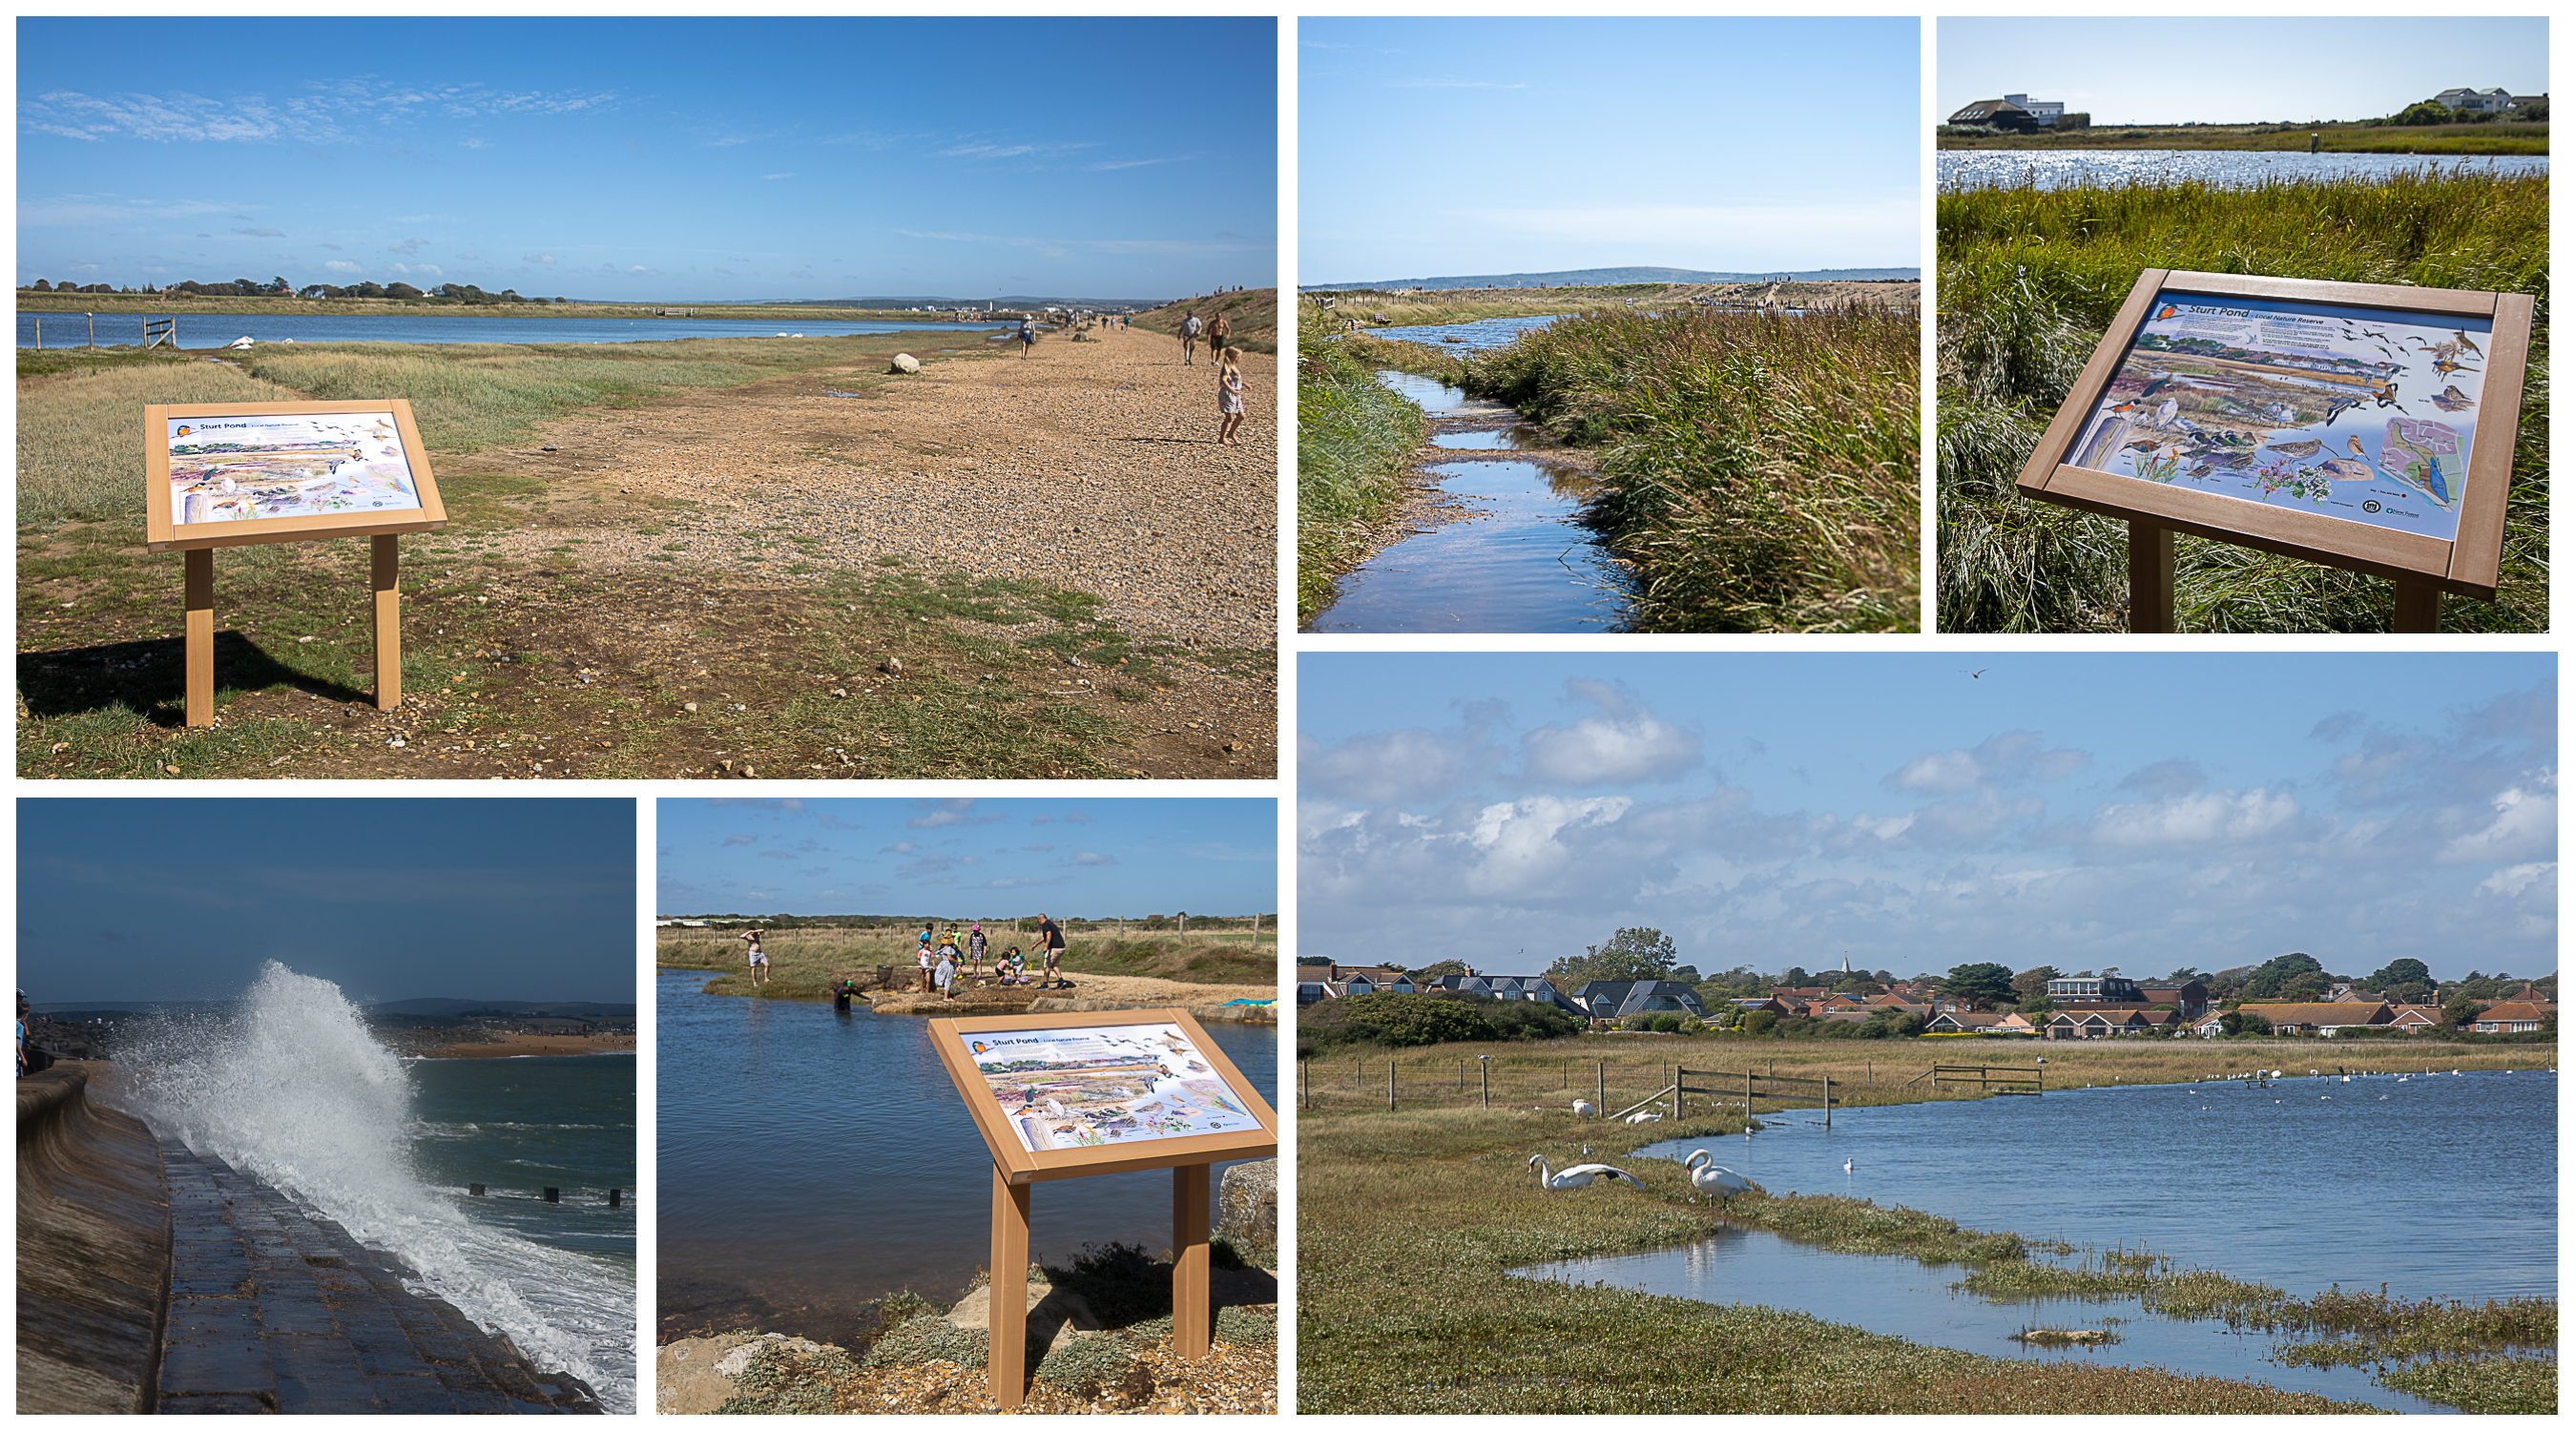 A walk around Sturt Pond and Milford on Sea where there is a changing places facility in the village car park.